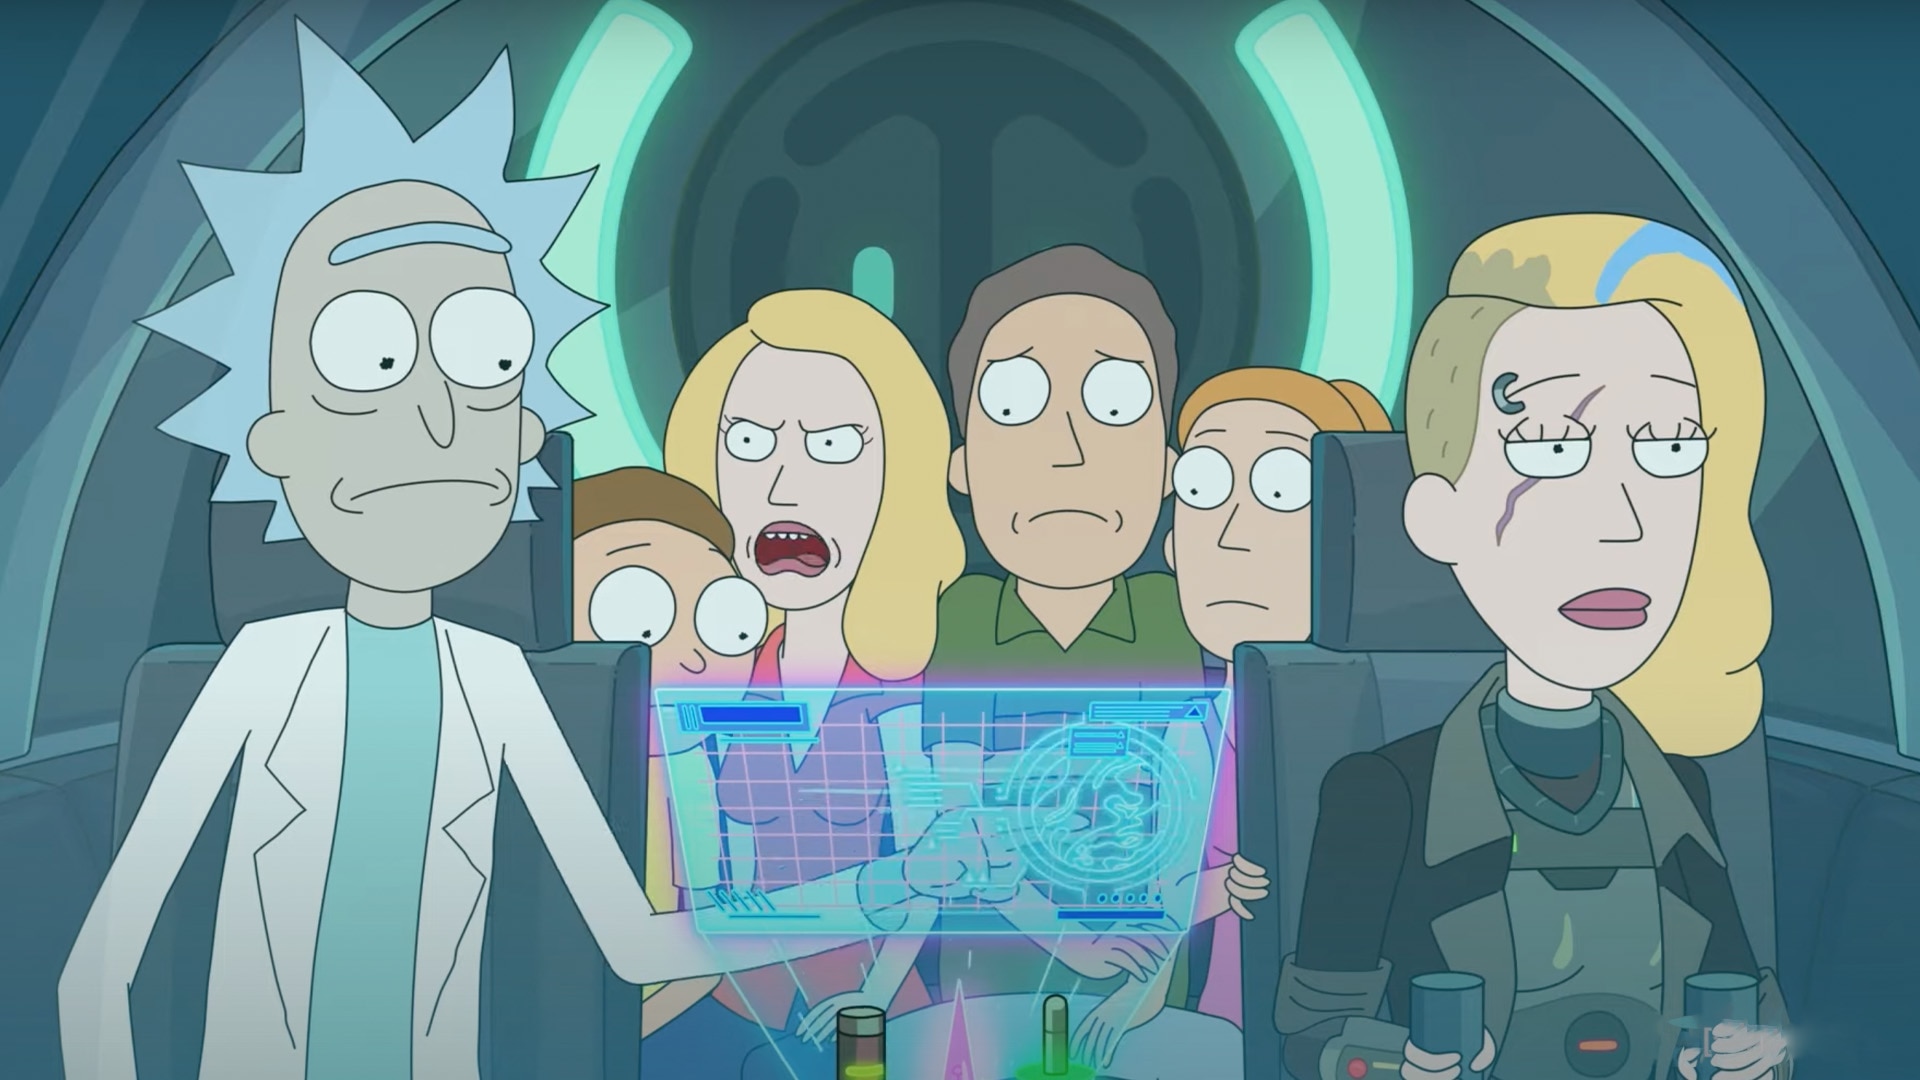 Rick and Morty': 5 Things You Missed in Season 5, Episode 5